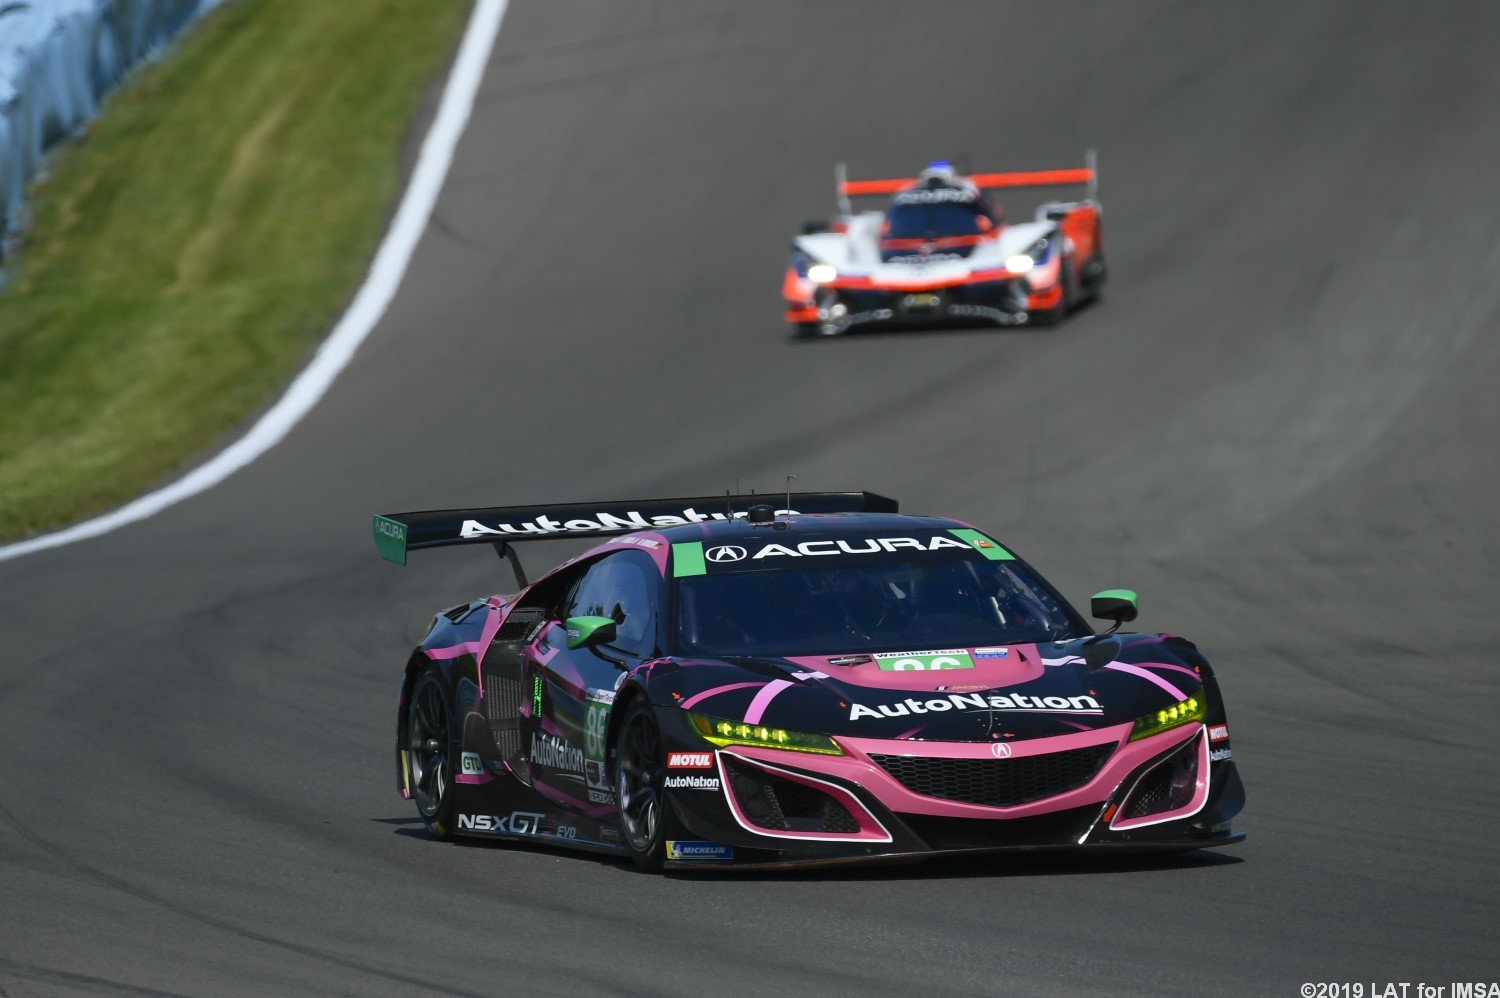 Trent Hindman led the Acura qualifying effort at Watkins Glen International Raceway on Saturday, and will start first in the GTD category for Sunday’s Sahlen’s Six Hours of The Glen